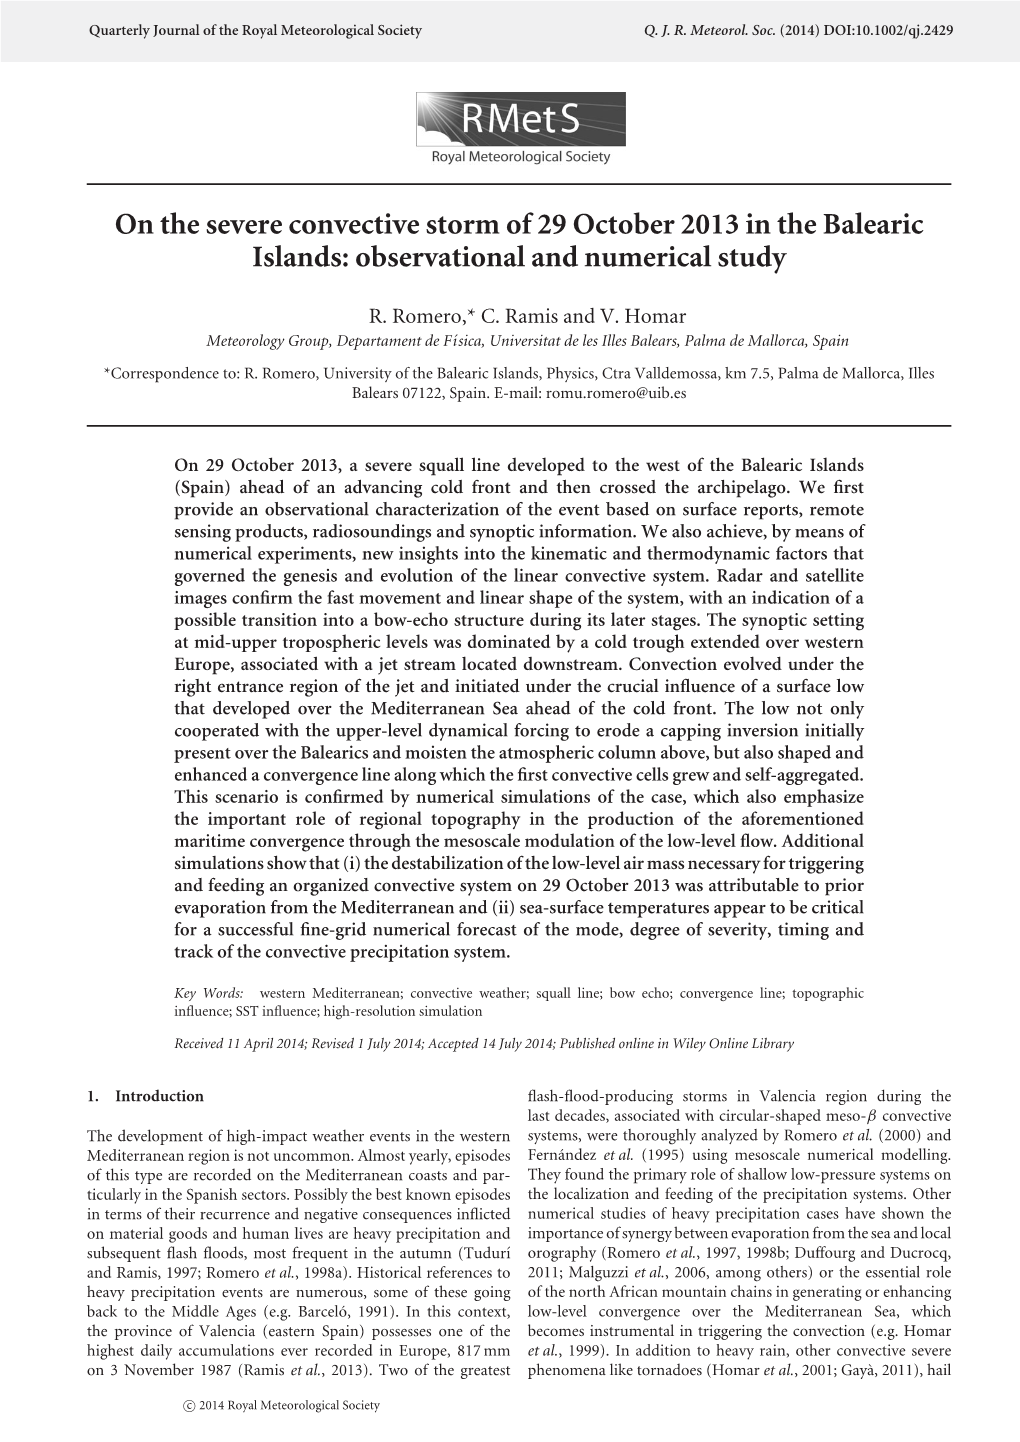 On the Severe Convective Storm of 29 October 2013 in the Balearic Islands: Observational and Numerical Study